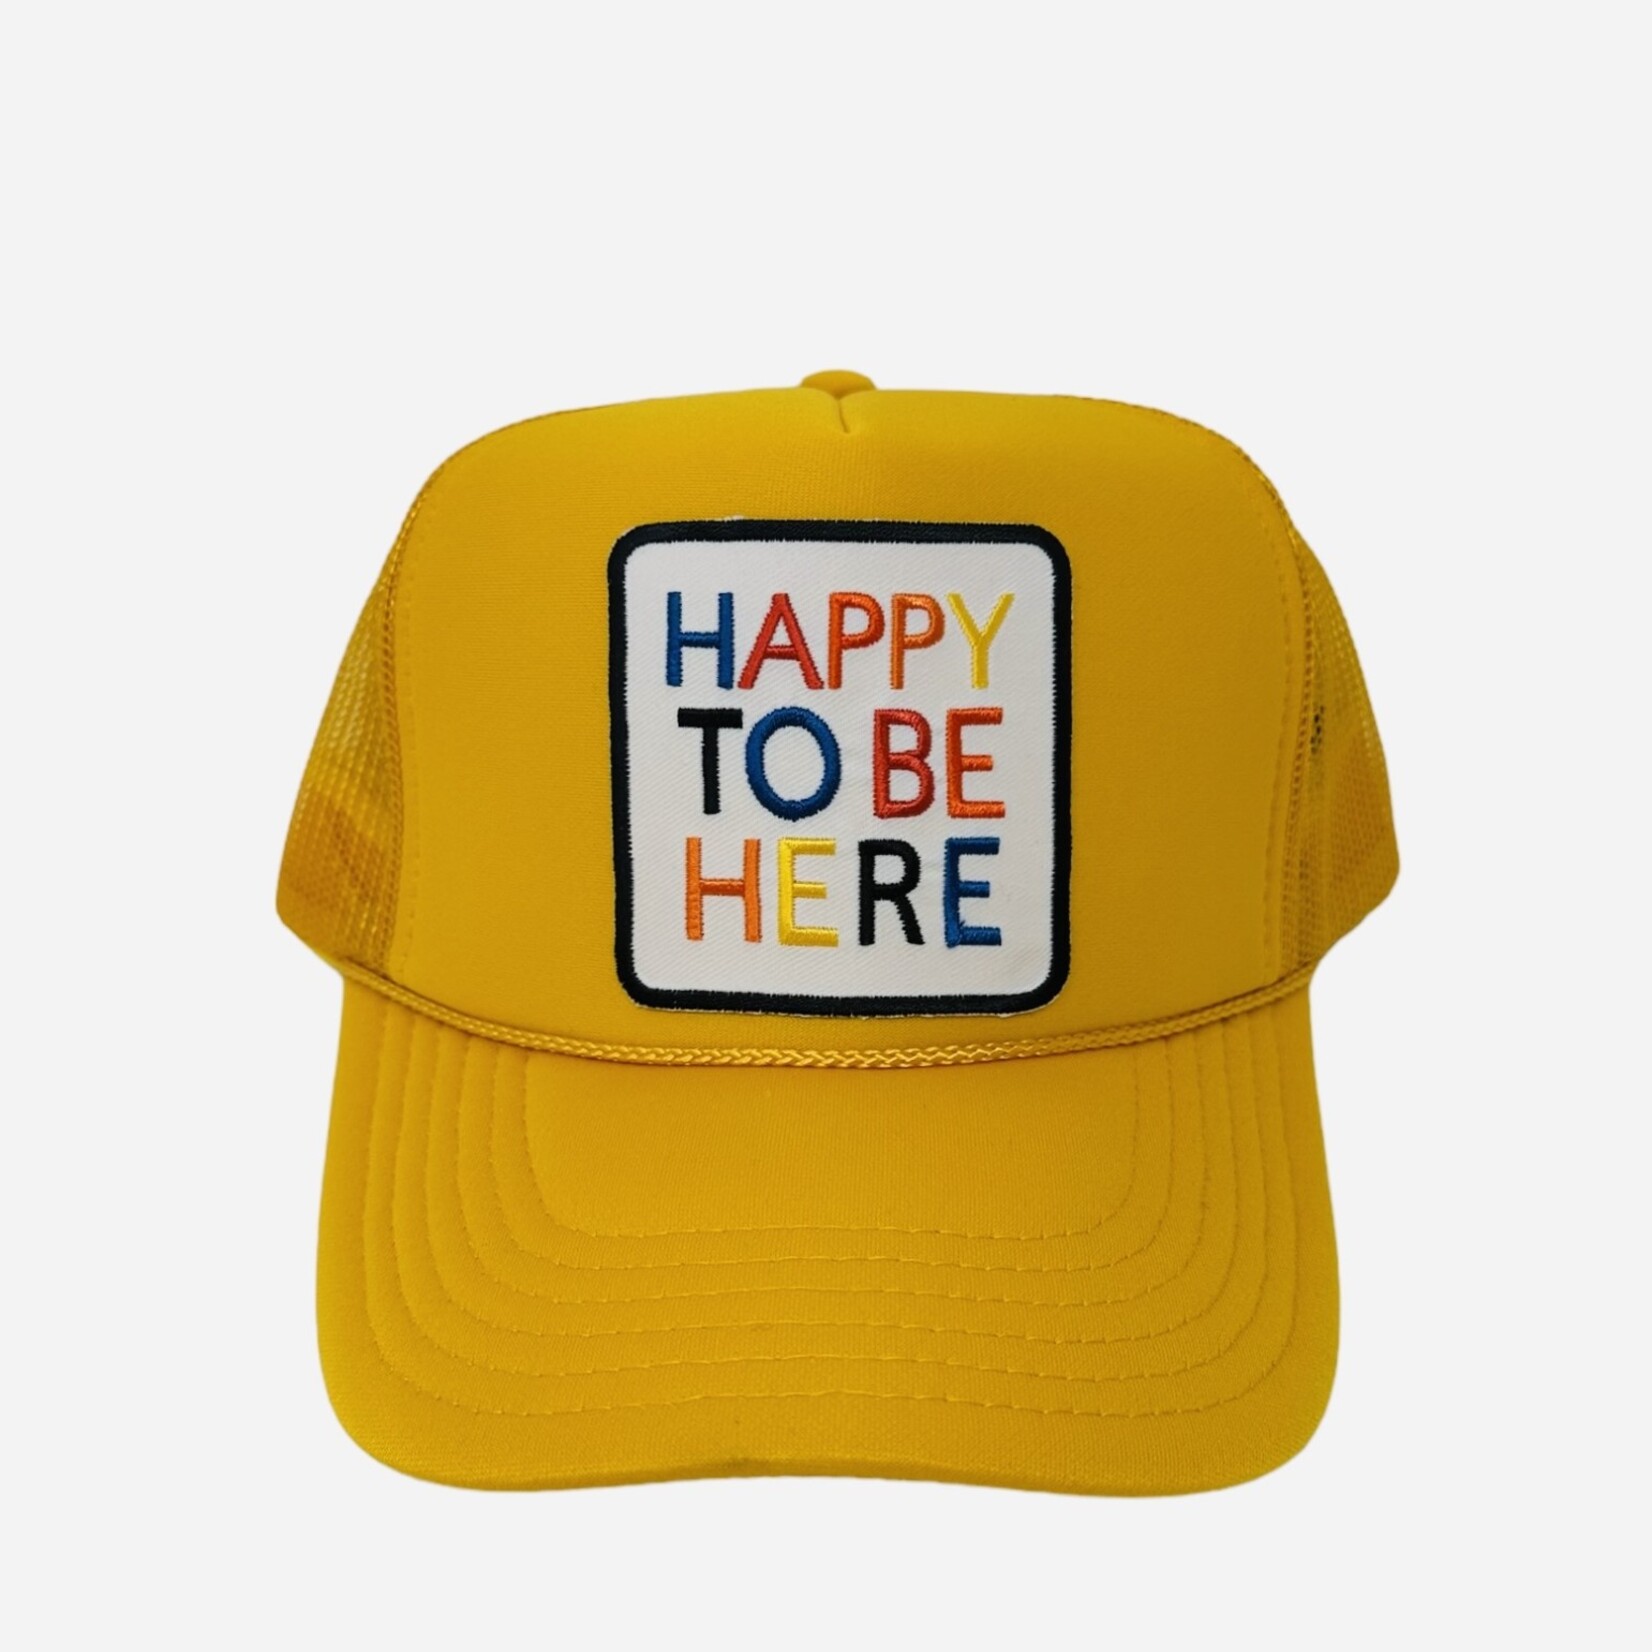 Après Babe "Happy To Be Here" Primary Colors Trucker Hat